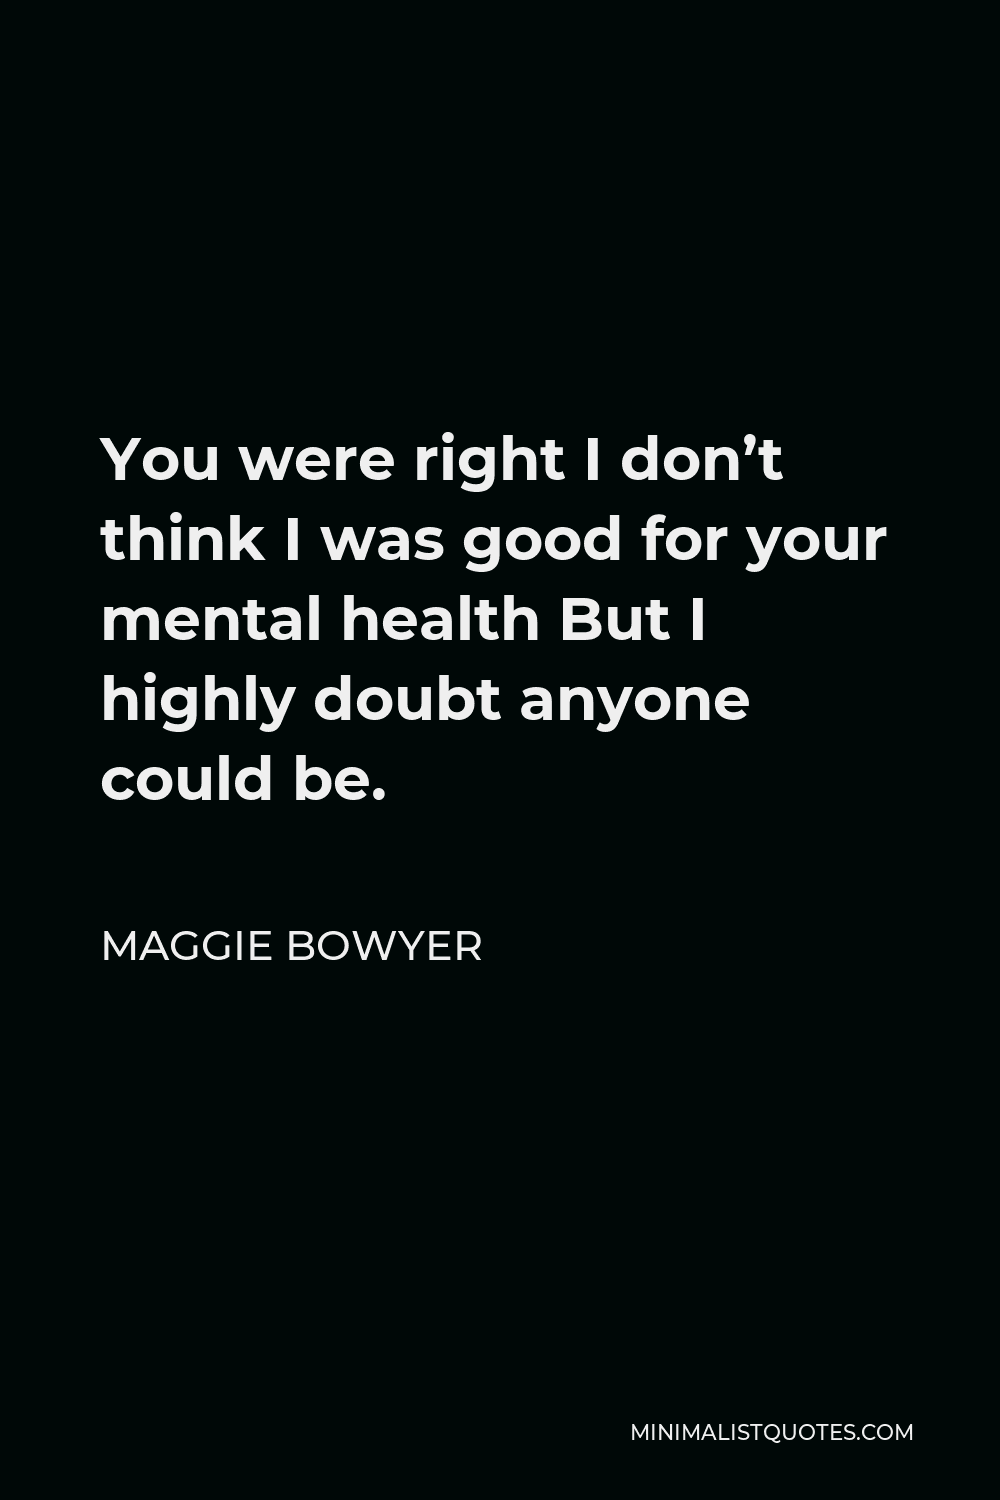 Maggie Bowyer Quote - You were right I don’t think I was good for your mental health But I highly doubt anyone could be.